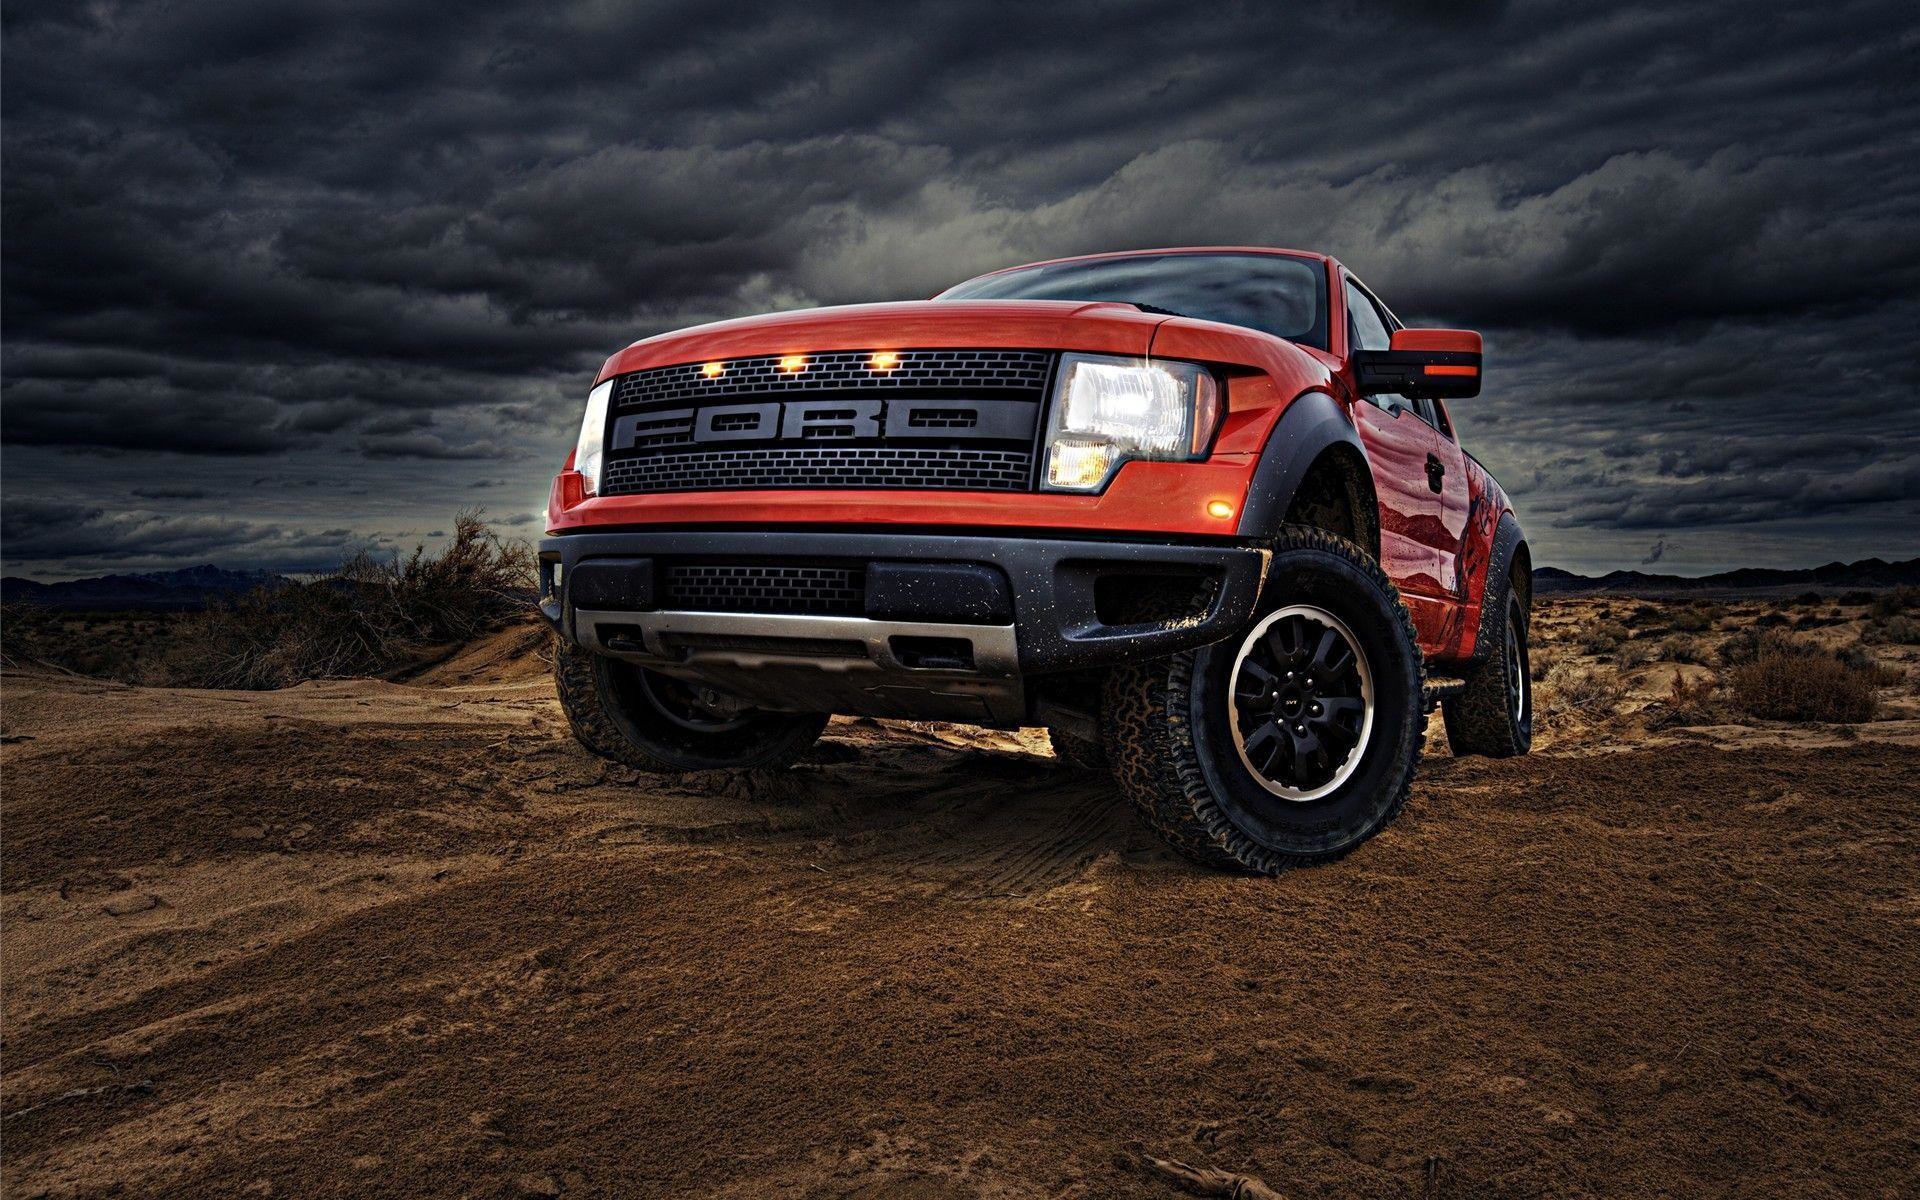 10480 Lifted Truck Wallpaper HD  Android iPhone Desktop HD  Backgrounds  Wallpapers 1080p 4k HD Wallpapers Desktop Background   Android  iPhone 1080p 4k 1080x721 2023